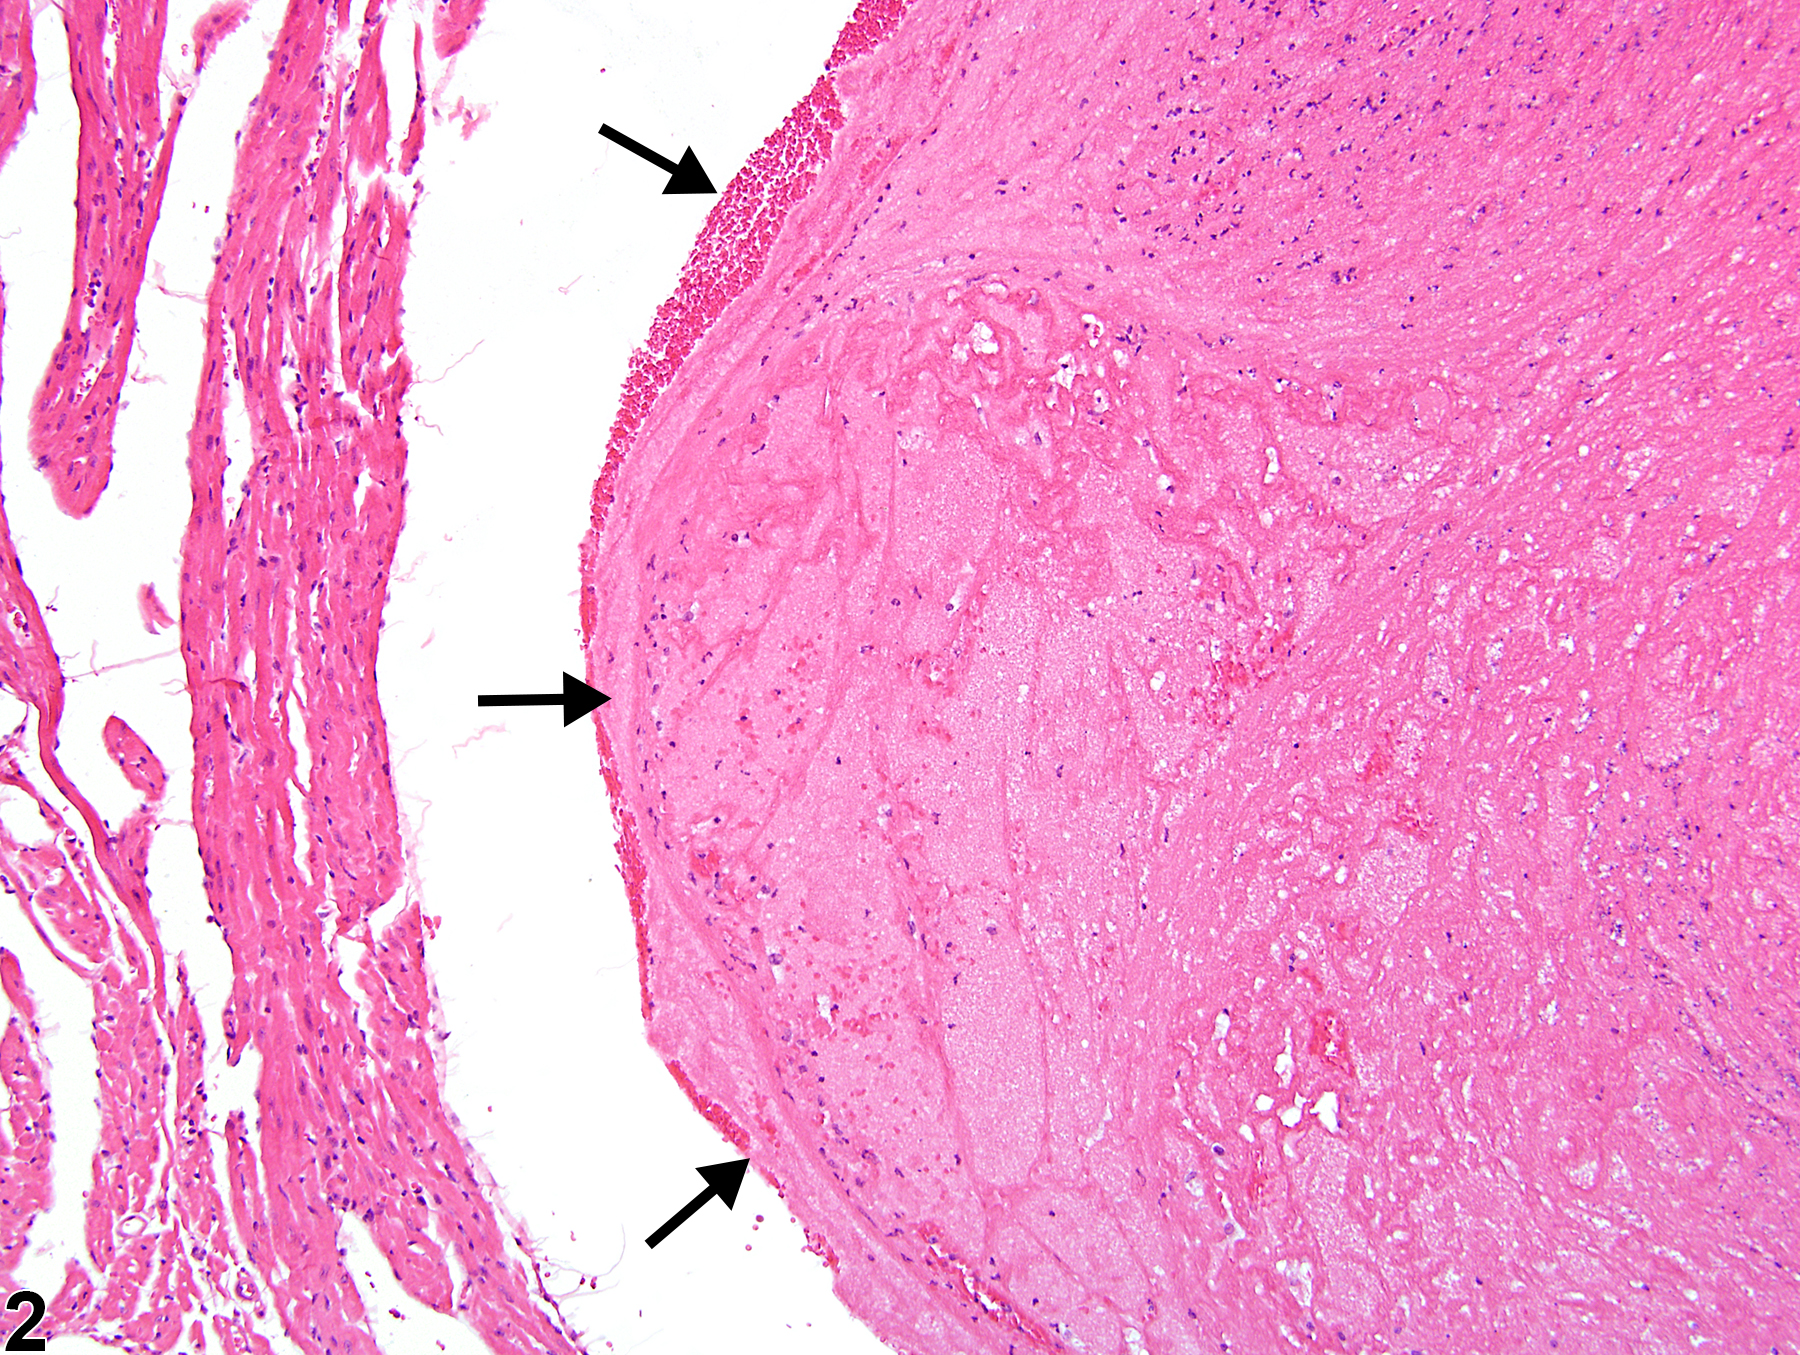 Image of thrombus in the heart, atrium from a male Swiss Webster mouse in a chronic study